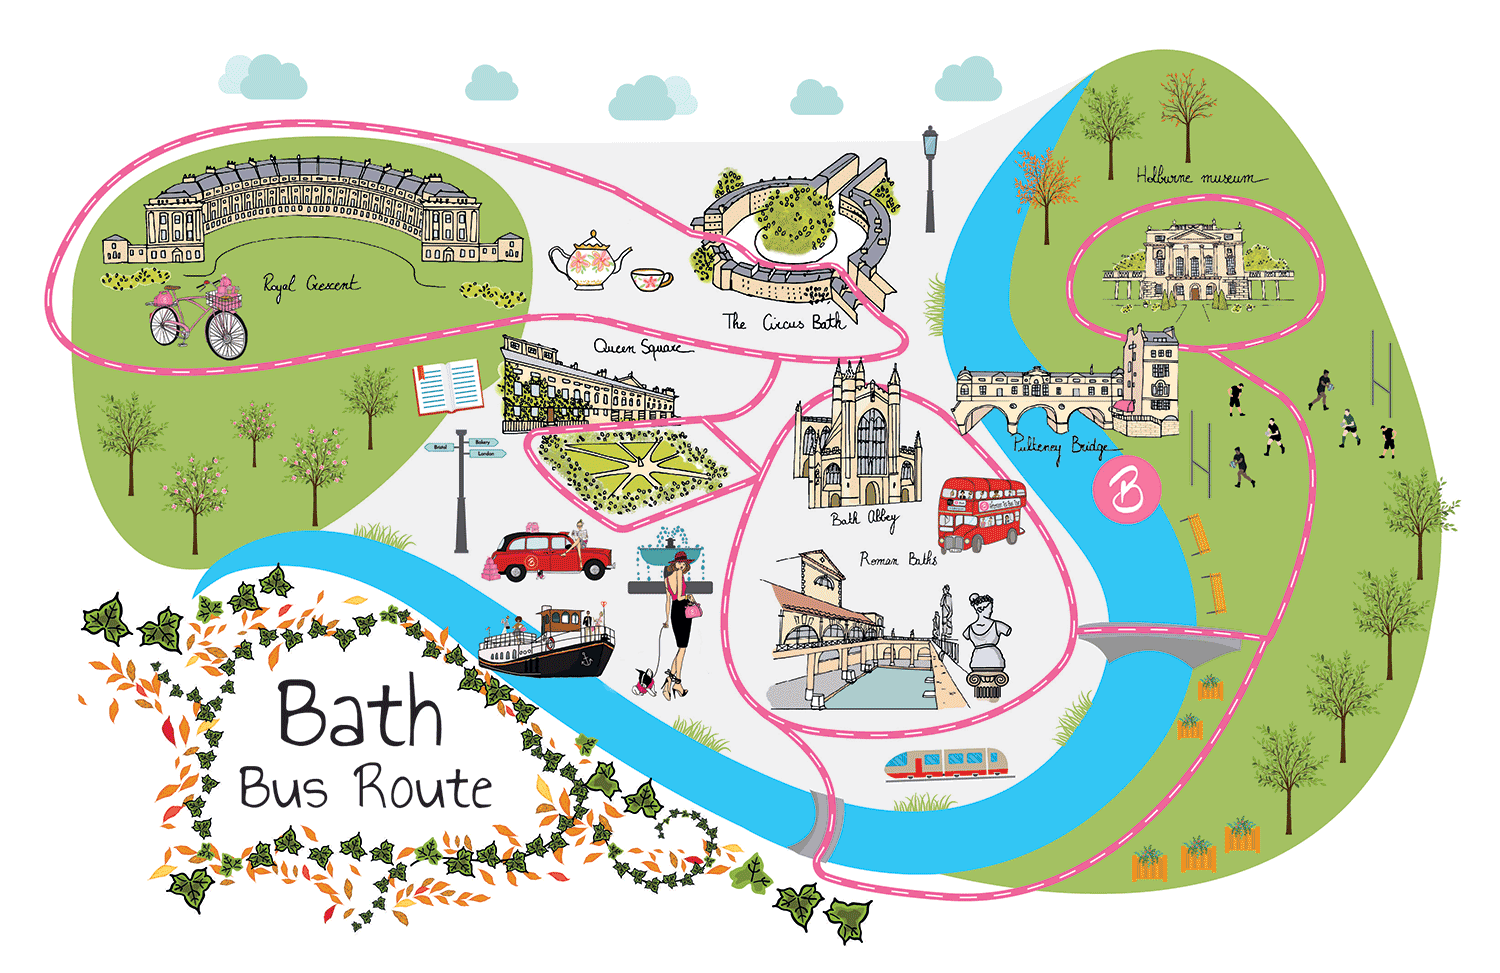 Baker Bus Bath Route Map - The Millennial Runaway - A Travel Blog for Busy ...